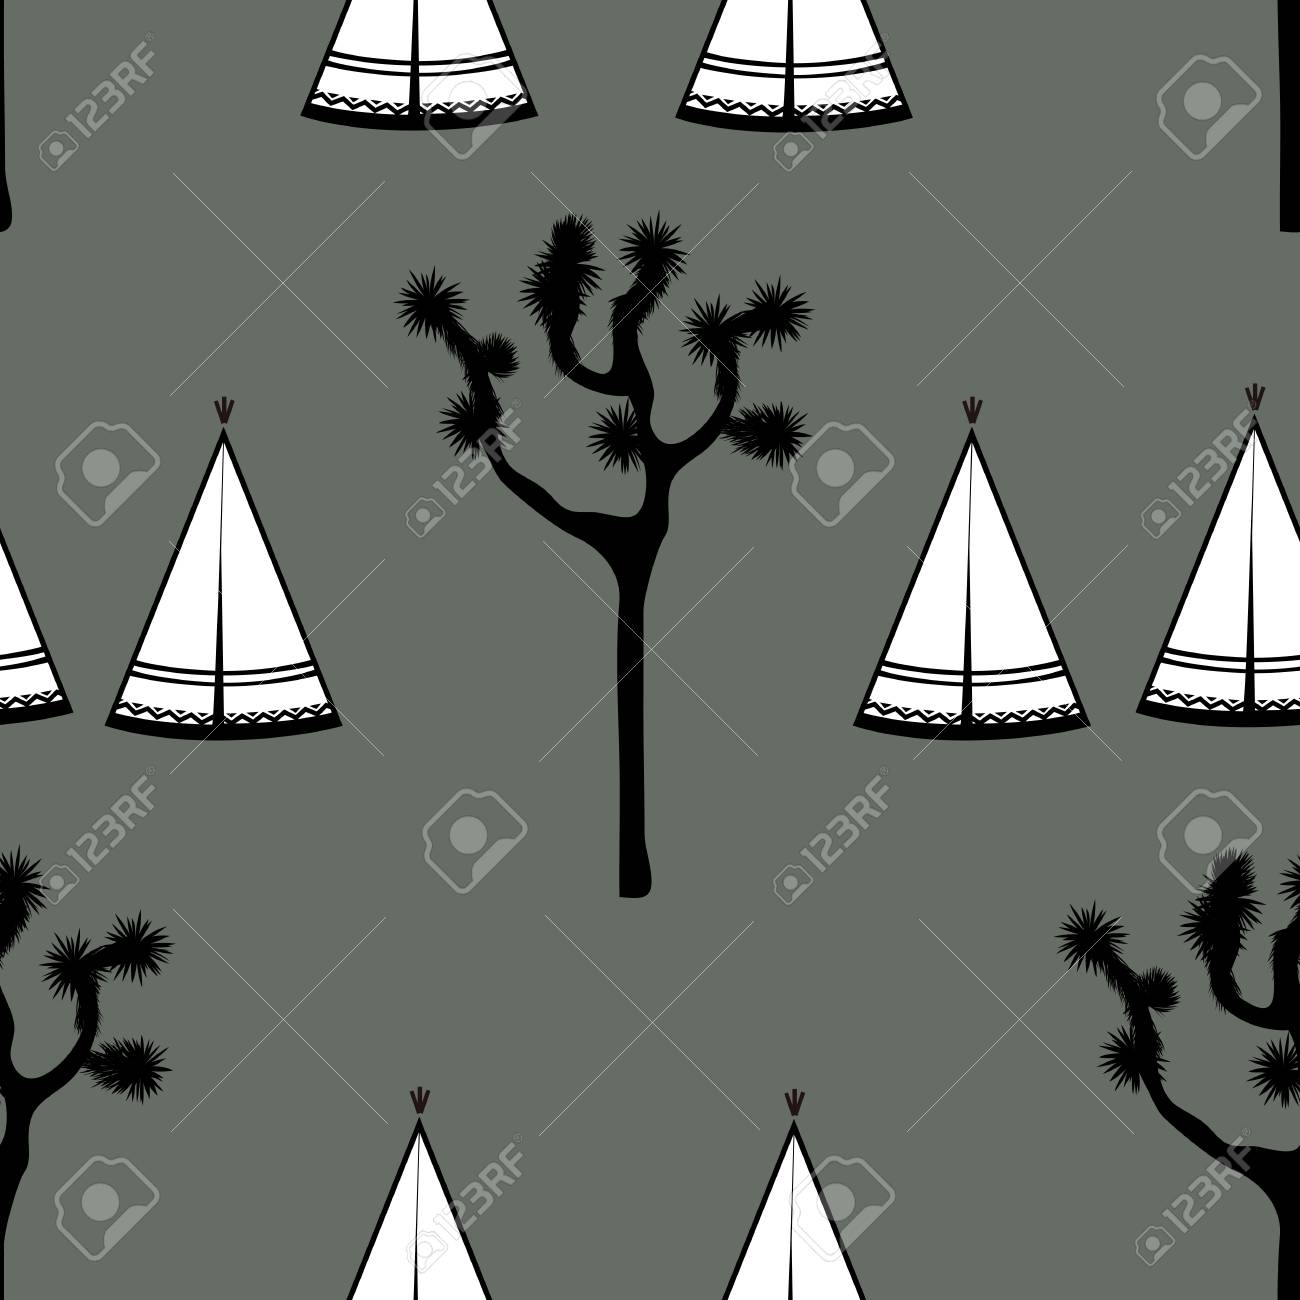 Indian Tents And Joshua Tree On White Background Cute Design